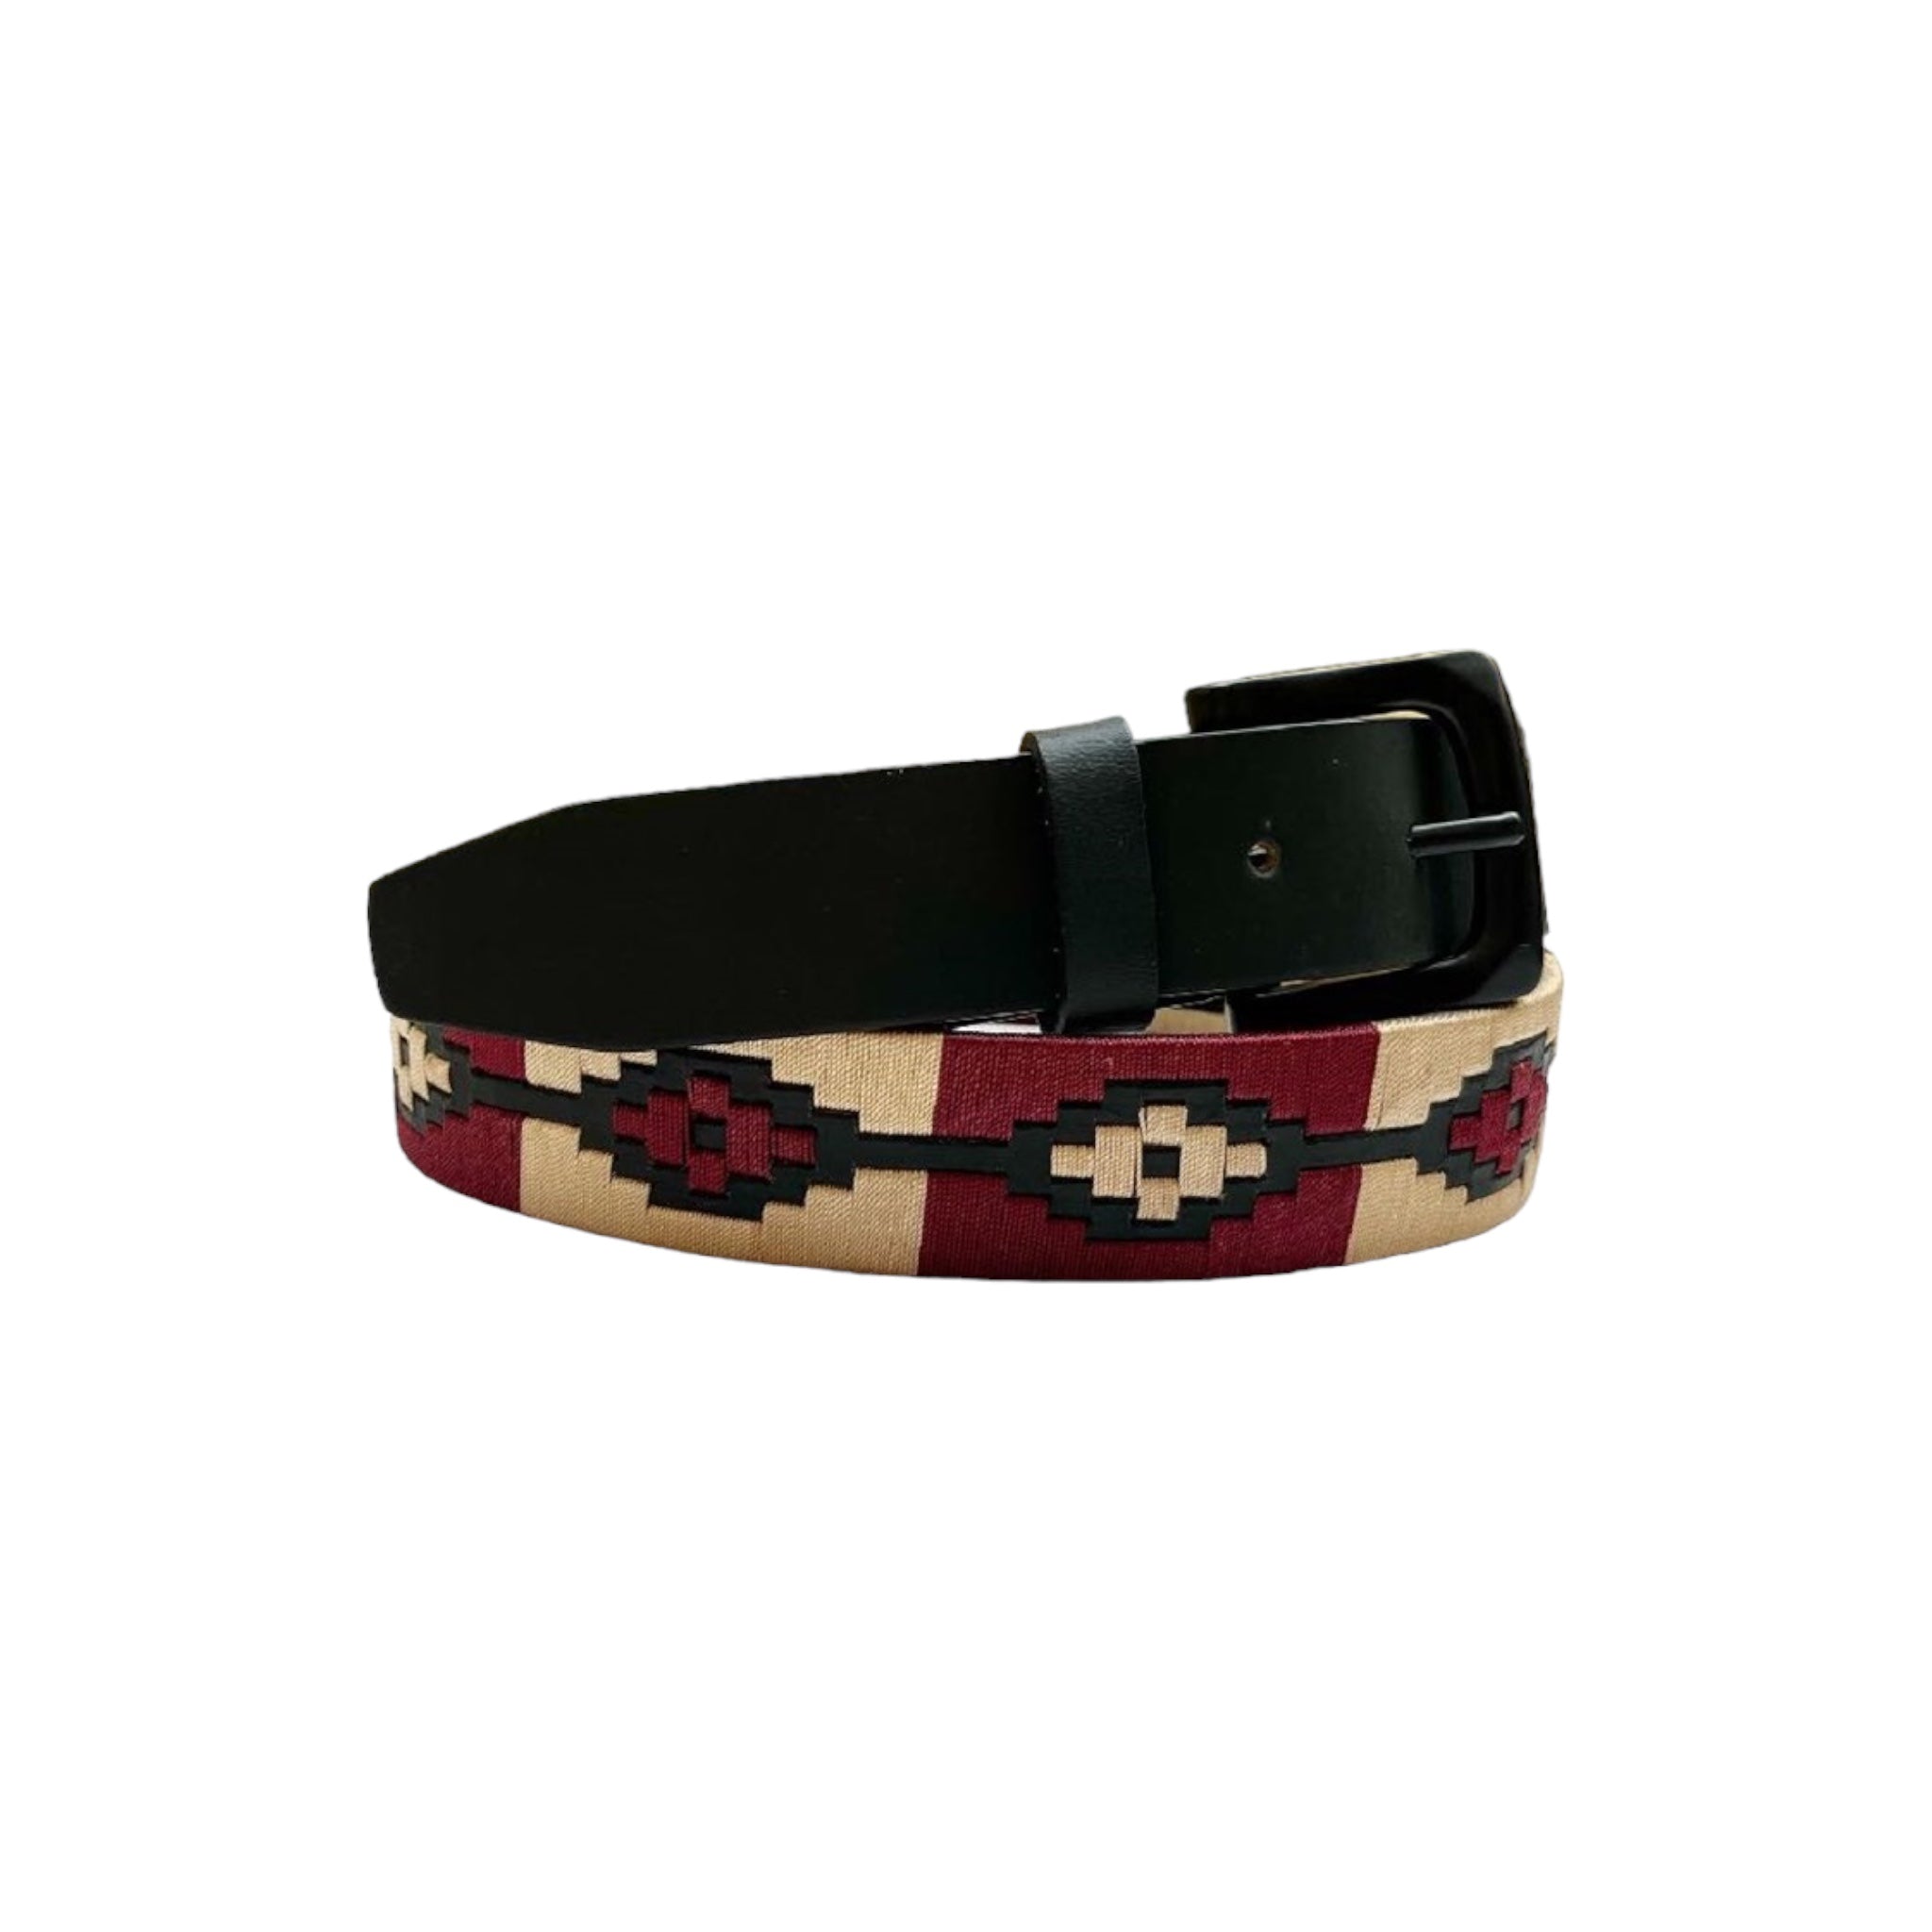 Mens Leather Embroidered Polo Belt